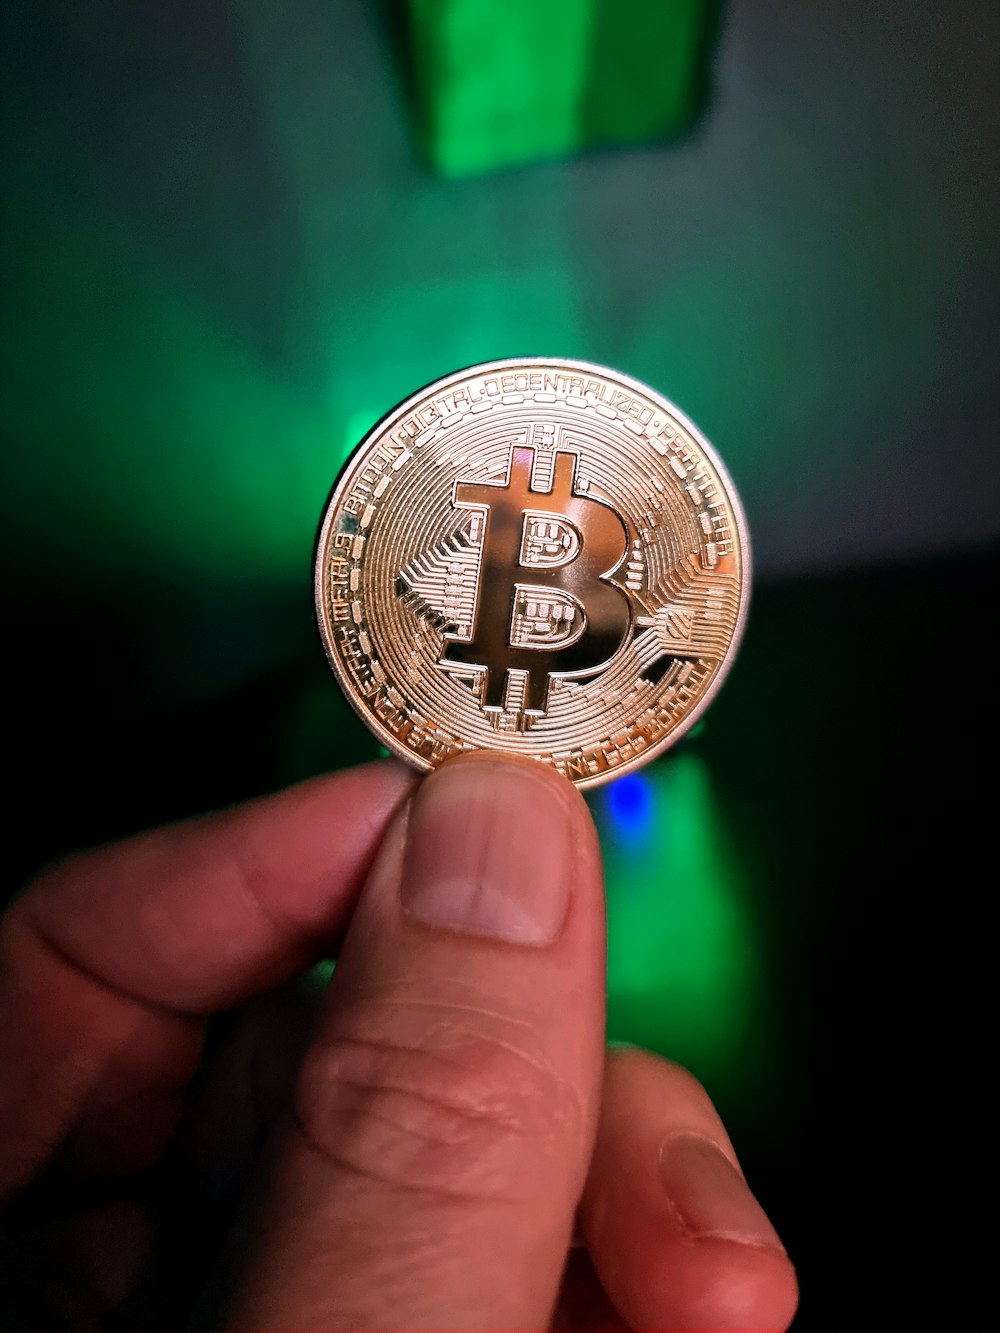 a hand holding a bit coin in front of a green light